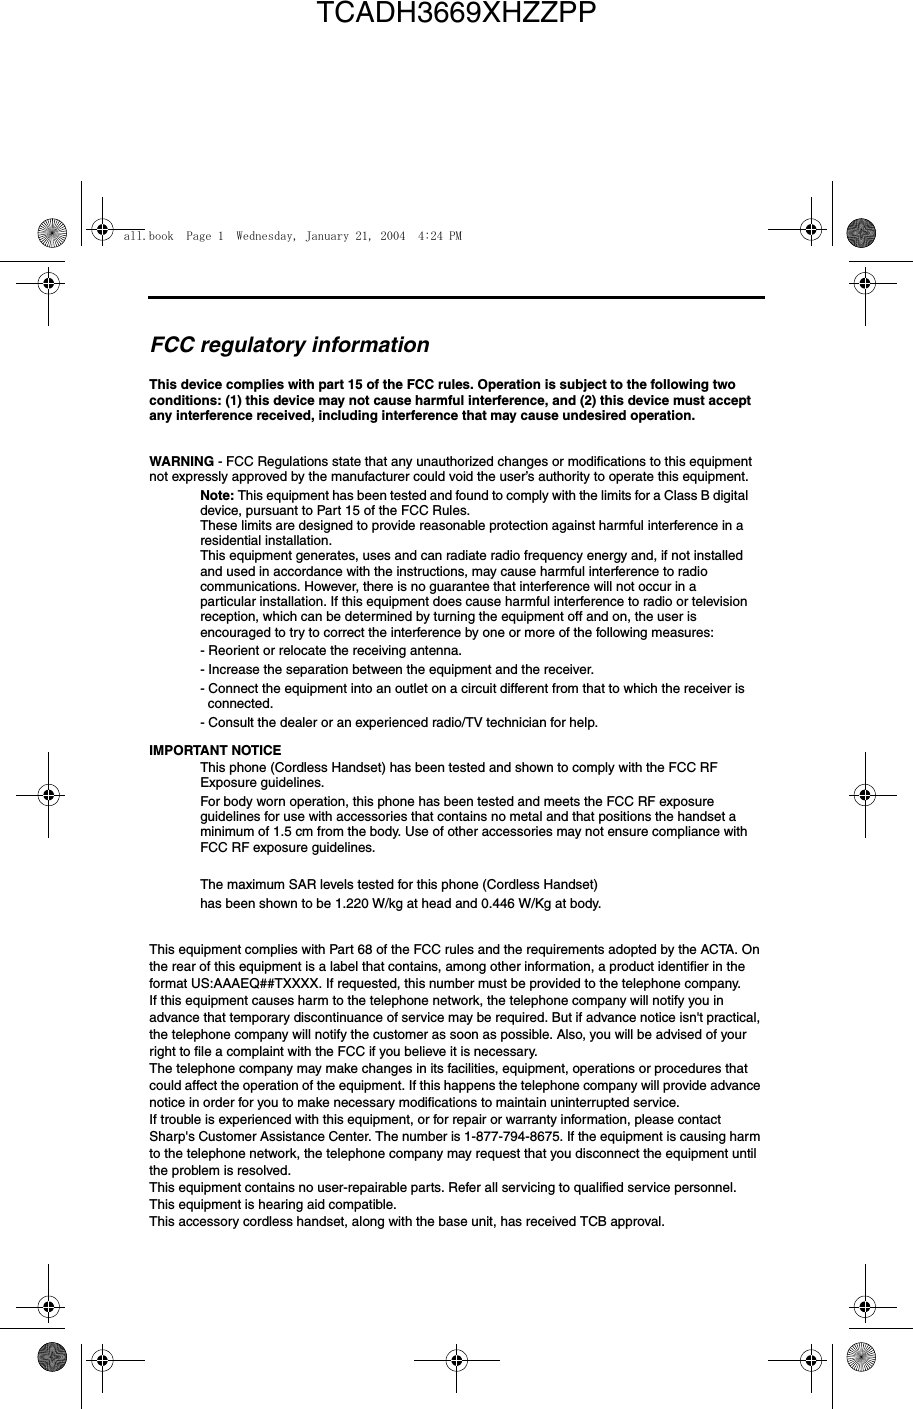 FCC regulatory informationThis device complies with part 15 of the FCC rules. Operation is subject to the following two conditions: (1) this device may not cause harmful interference, and (2) this device must accept any interference received, including interference that may cause undesired operation.WARNING - FCC Regulations state that any unauthorized changes or modifications to this equipment not expressly approved by the manufacturer could void the user’s authority to operate this equipment.Note: This equipment has been tested and found to comply with the limits for a Class B digital device, pursuant to Part 15 of the FCC Rules.These limits are designed to provide reasonable protection against harmful interference in a residential installation.This equipment generates, uses and can radiate radio frequency energy and, if not installed and used in accordance with the instructions, may cause harmful interference to radio communications. However, there is no guarantee that interference will not occur in a particular installation. If this equipment does cause harmful interference to radio or television reception, which can be determined by turning the equipment off and on, the user is encouraged to try to correct the interference by one or more of the following measures:- Reorient or relocate the receiving antenna.- Increase the separation between the equipment and the receiver.- Connect the equipment into an outlet on a circuit different from that to which the receiver is connected.- Consult the dealer or an experienced radio/TV technician for help.IMPORTANT NOTICEThis phone (Cordless Handset) has been tested and shown to comply with the FCC RF Exposure guidelines.For body worn operation, this phone has been tested and meets the FCC RF exposure guidelines for use with accessories that contains no metal and that positions the handset a minimum of 1.5 cm from the body. Use of other accessories may not ensure compliance with FCC RF exposure guidelines.The maximum SAR levels tested for this phone (Cordless Handset) has been shown to be 1.220 W/kg at head and 0.446 W/Kg at body.This equipment complies with Part 68 of the FCC rules and the requirements adopted by the ACTA. On the rear of this equipment is a label that contains, among other information, a product identifier in the format US:AAAEQ##TXXXX. If requested, this number must be provided to the telephone company. If this equipment causes harm to the telephone network, the telephone company will notify you in advance that temporary discontinuance of service may be required. But if advance notice isn&apos;t practical, the telephone company will notify the customer as soon as possible. Also, you will be advised of your right to file a complaint with the FCC if you believe it is necessary.The telephone company may make changes in its facilities, equipment, operations or procedures that could affect the operation of the equipment. If this happens the telephone company will provide advance notice in order for you to make necessary modifications to maintain uninterrupted service.If trouble is experienced with this equipment, or for repair or warranty information, please contact Sharp&apos;s Customer Assistance Center. The number is 1-877-794-8675. If the equipment is causing harm to the telephone network, the telephone company may request that you disconnect the equipment until the problem is resolved.This equipment contains no user-repairable parts. Refer all servicing to qualified service personnel.This equipment is hearing aid compatible.This accessory cordless handset, along with the base unit, has received TCB approval.all.book  Page 1  Wednesday, January 21, 2004  4:24 PMTCADH3669XHZZPP